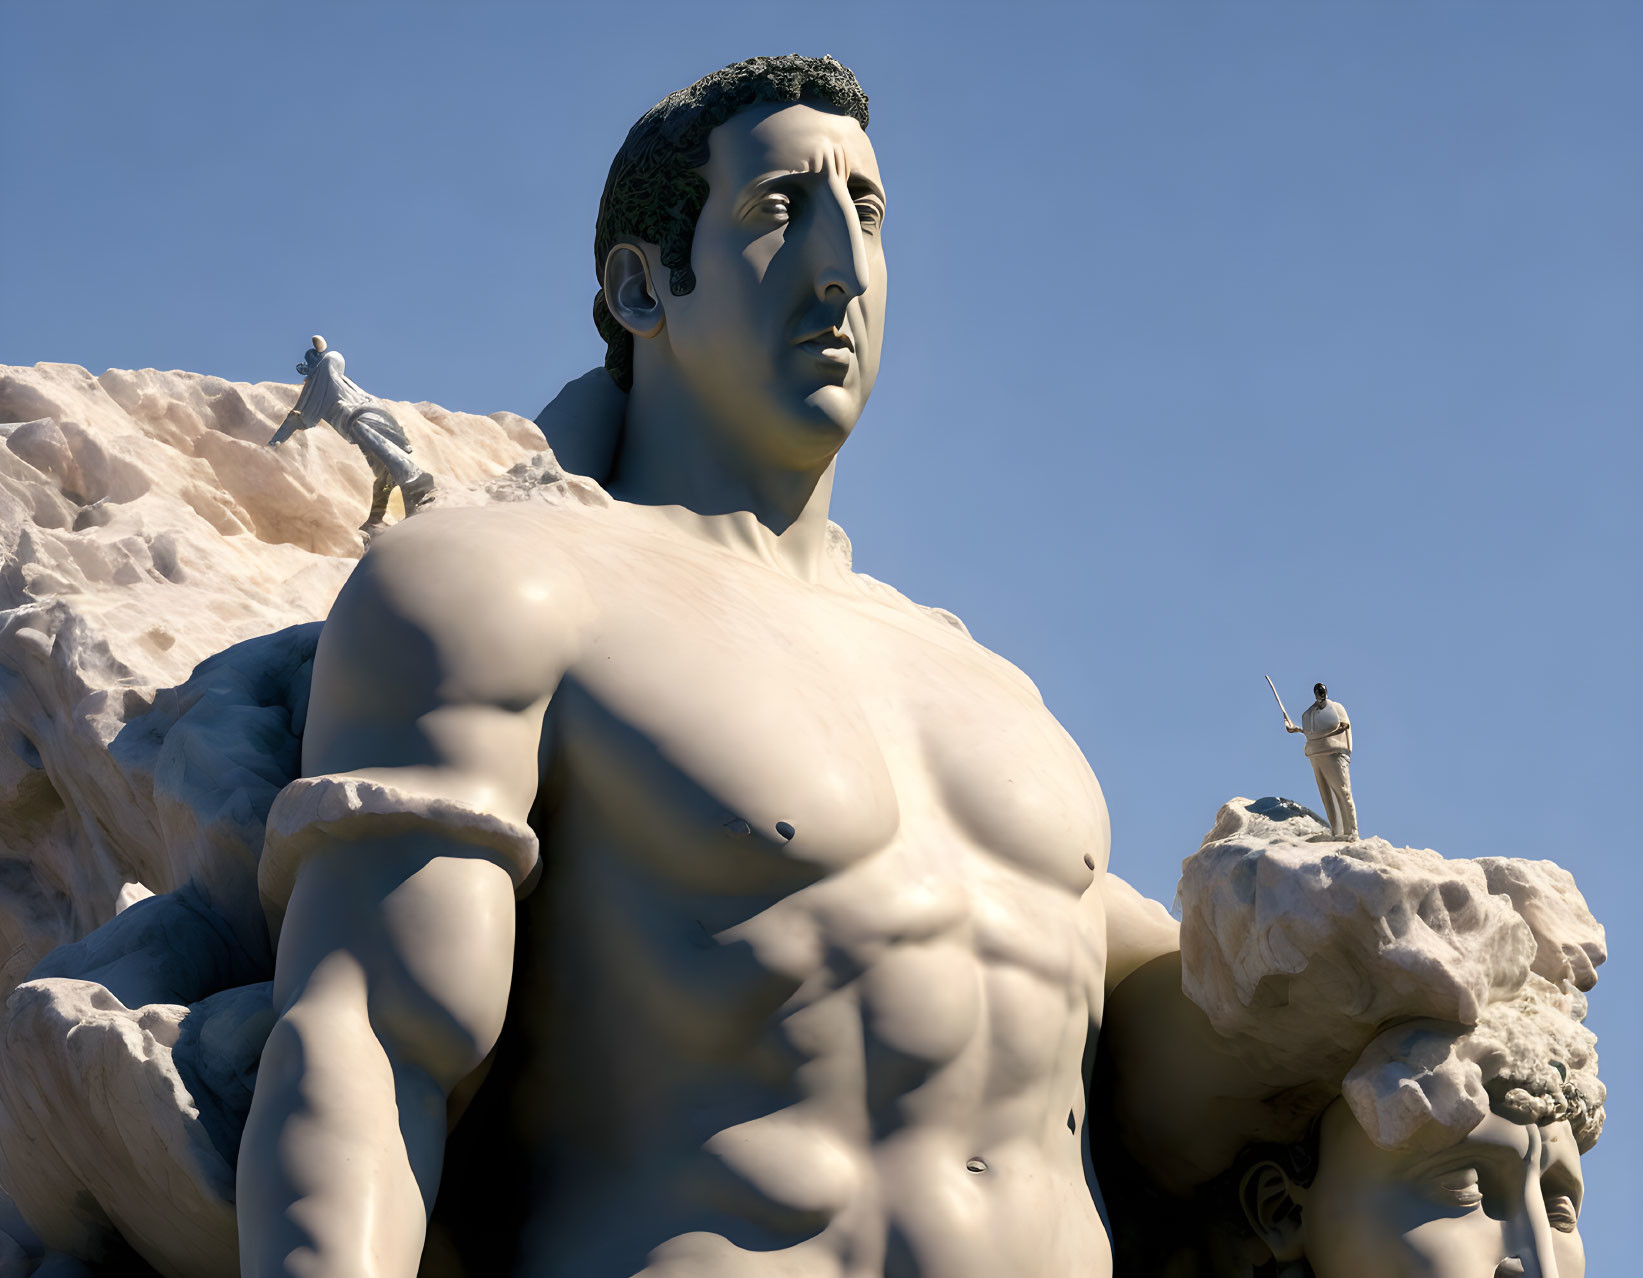 Muscular male statue with seagulls under clear blue sky